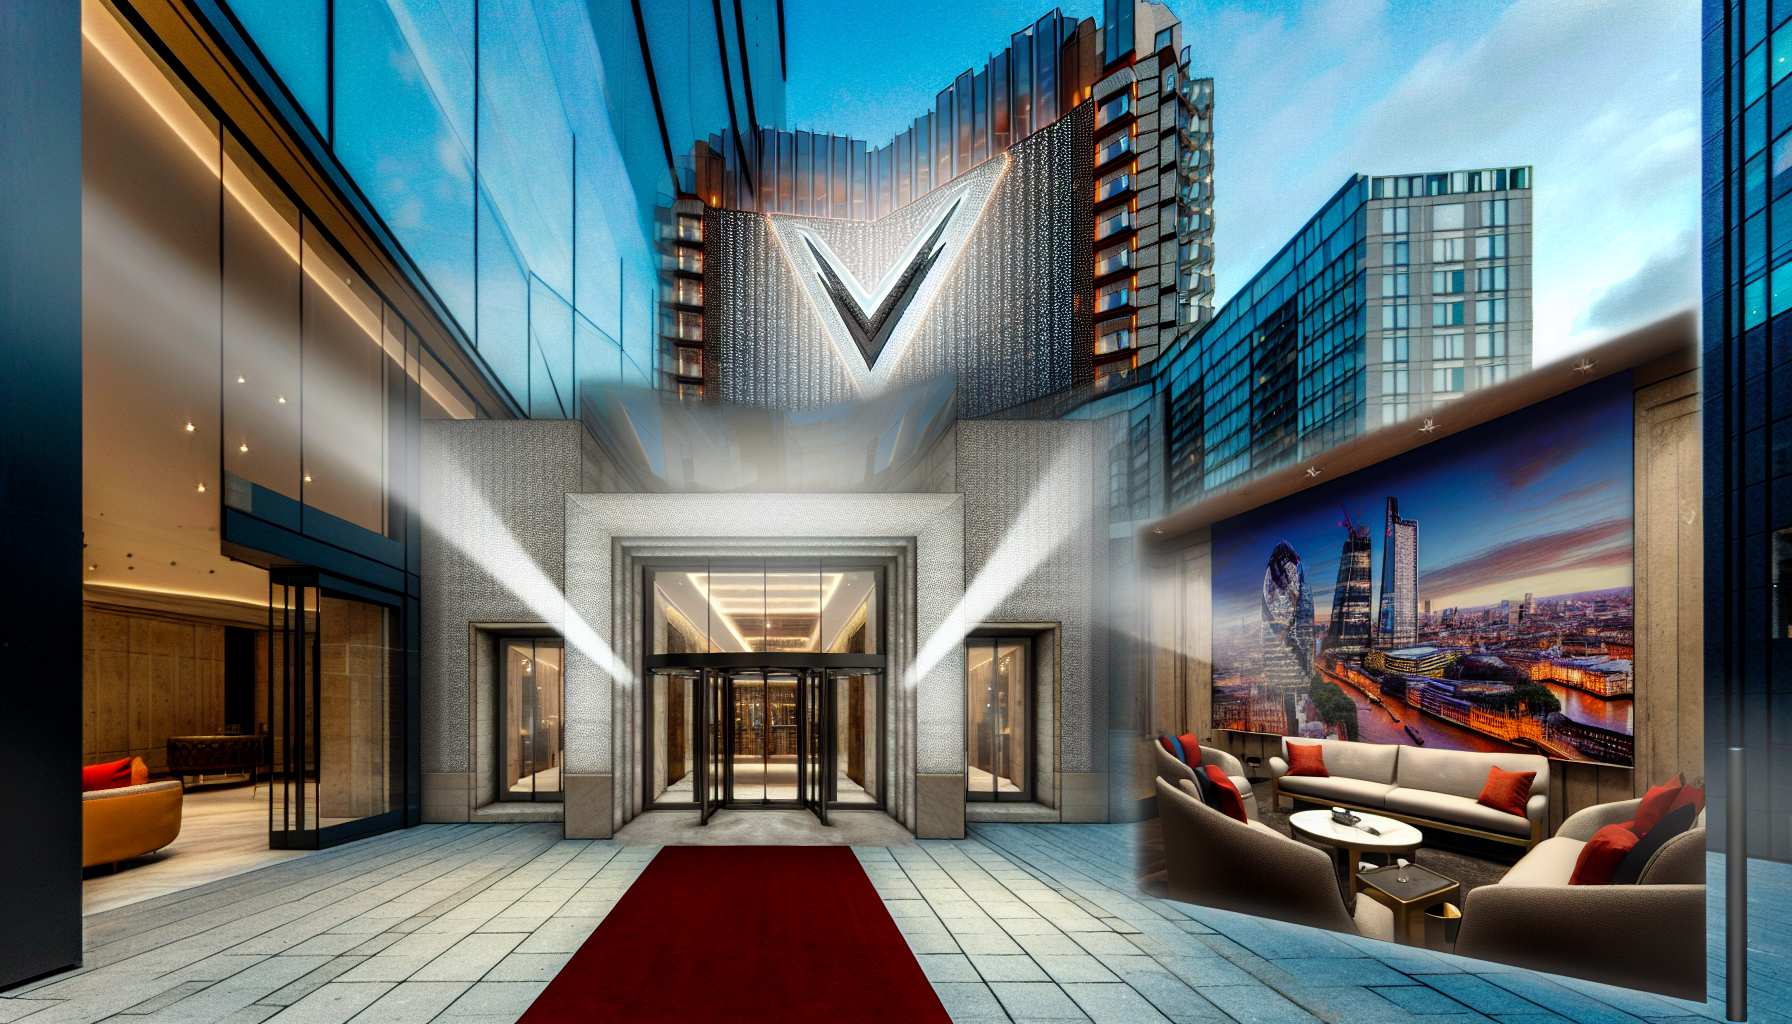 Virgin hotels debut in London: a groundbreaking addition to luxury hospitality